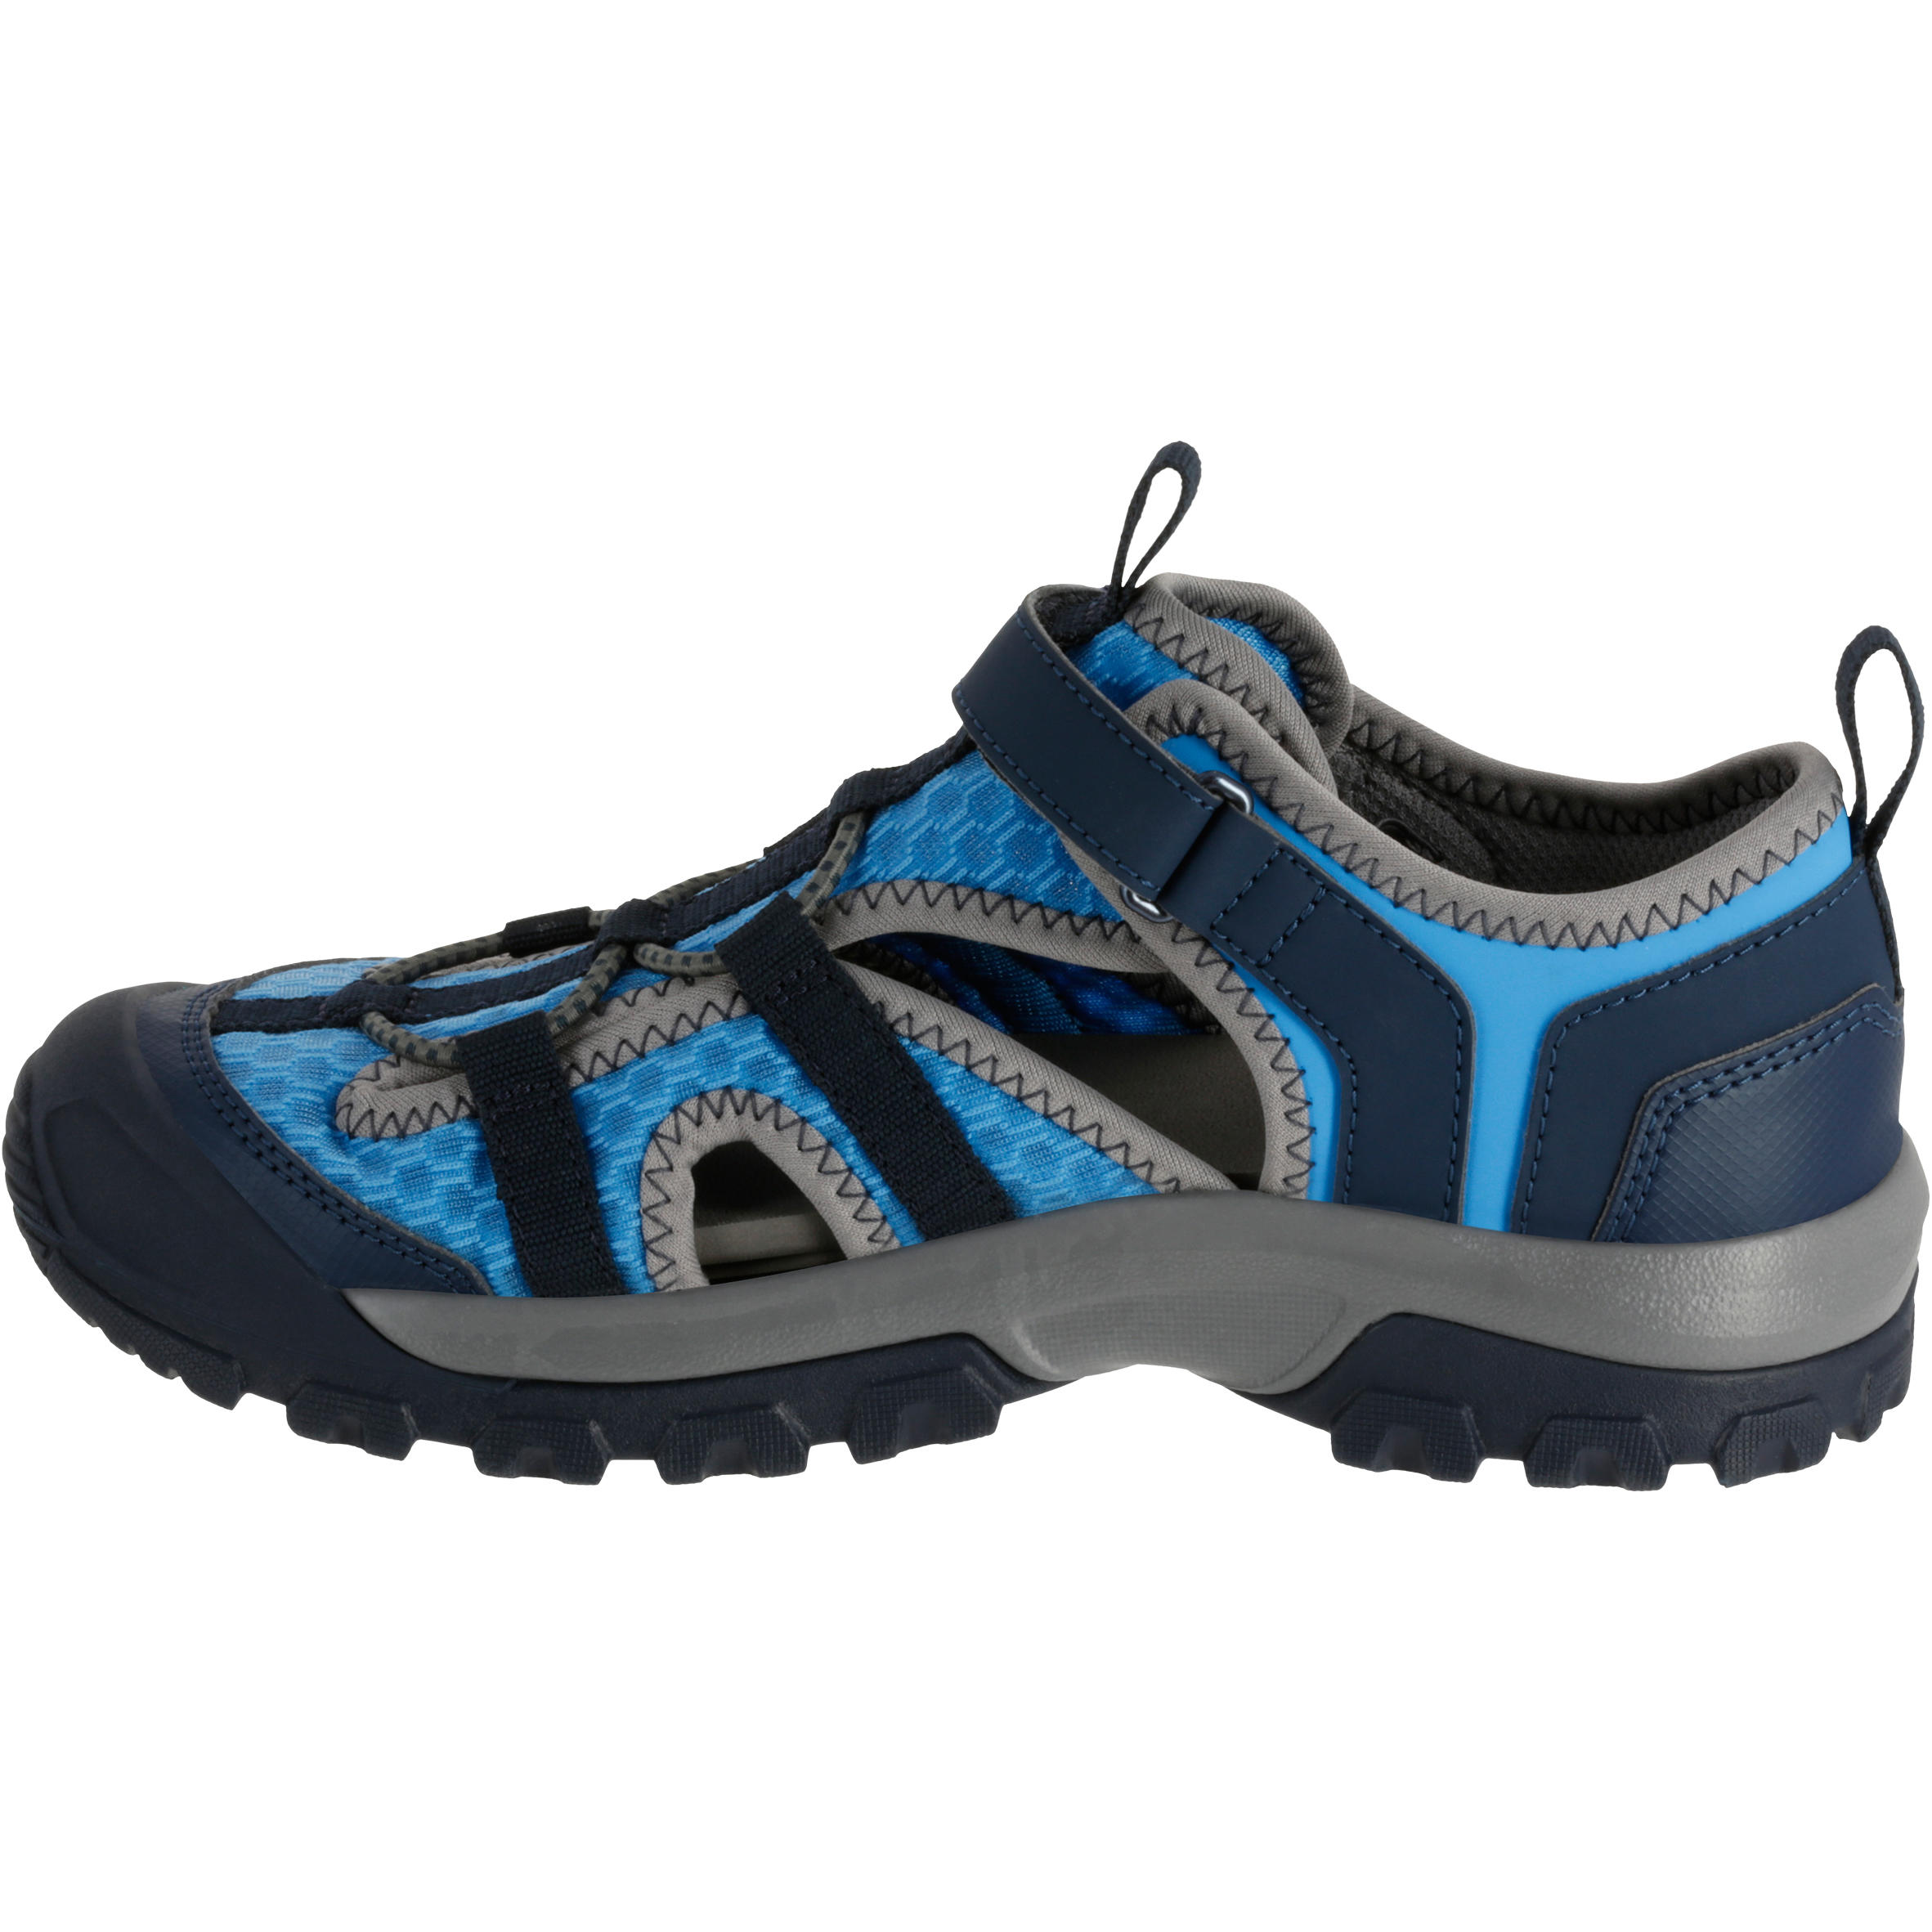 Kids’ Hiking Sandals MH150 - size 10 to 6 - Blue 2/8